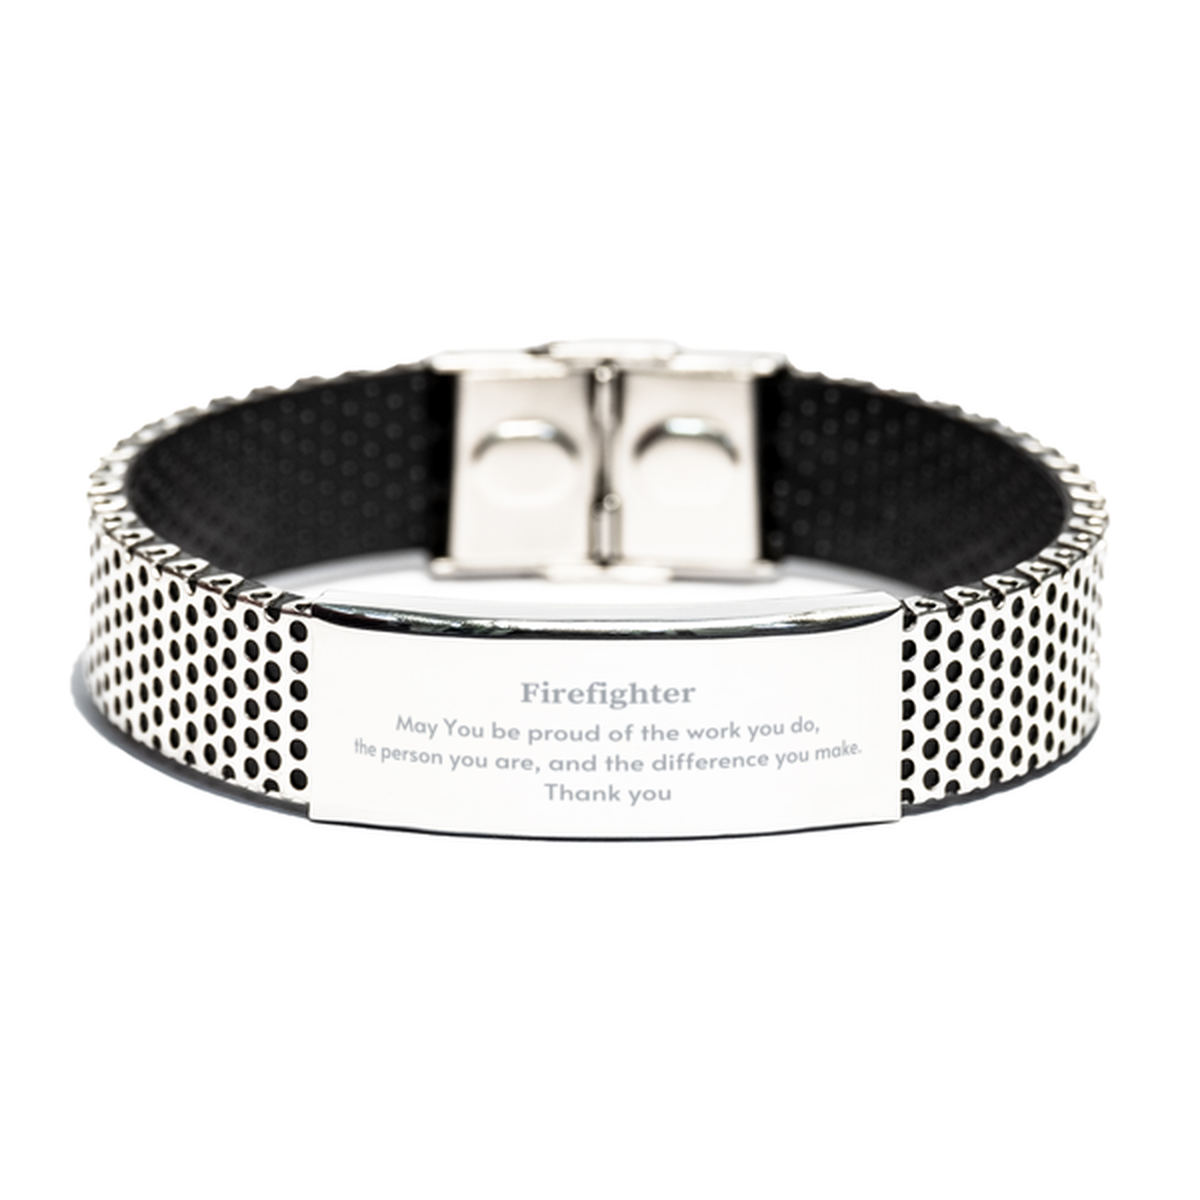 Heartwarming Stainless Steel Bracelet Retirement Coworkers Gifts for Firefighter, Firefighter May You be proud of the work you do, the person you are Gifts for Boss Men Women Friends